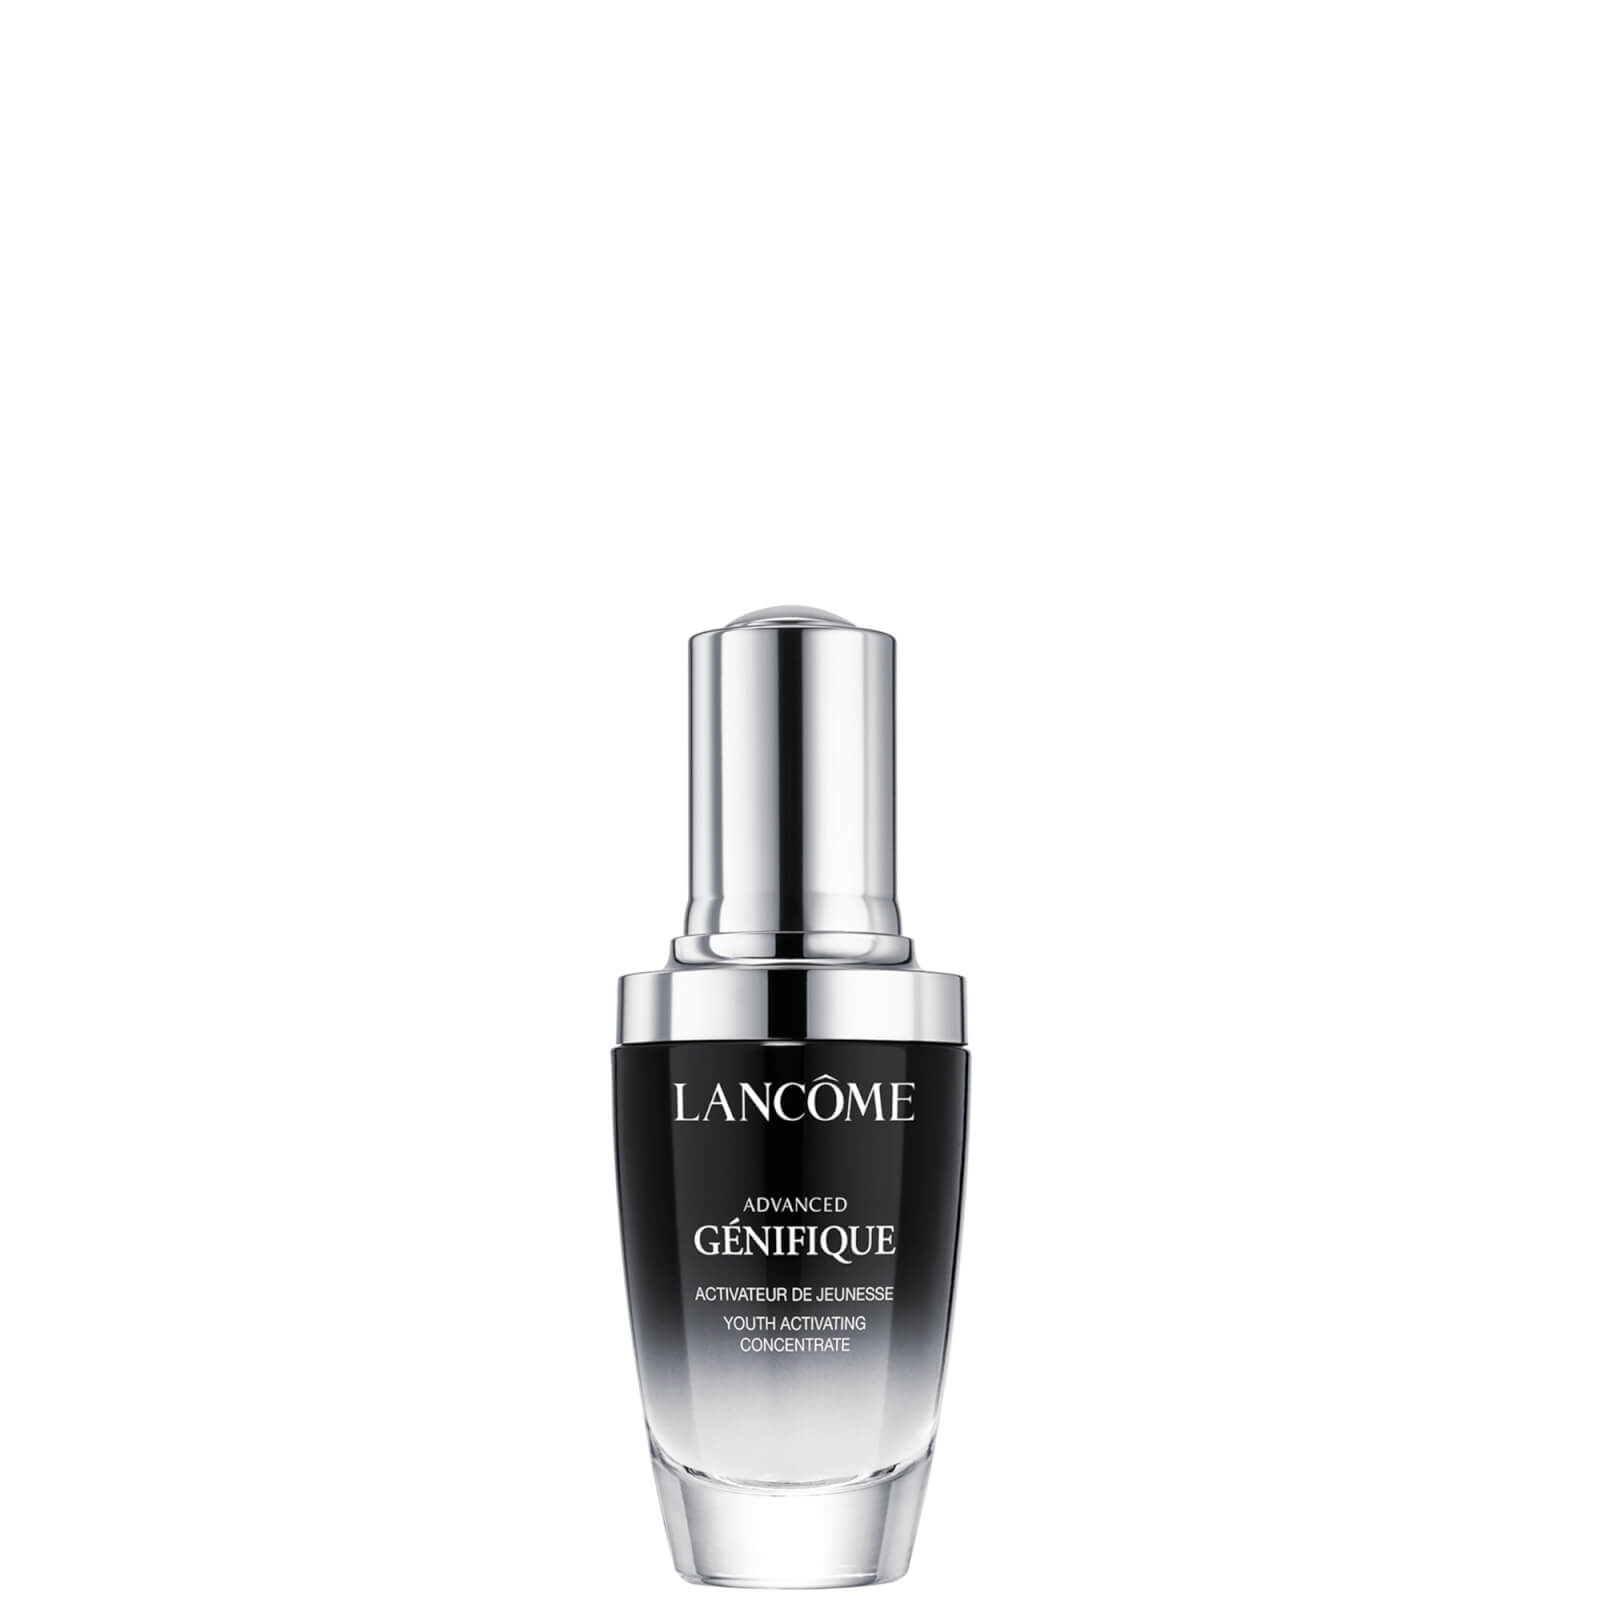 Lancome Advanced Genifique Youth Activating Serum (Various Sizes) - 30ml